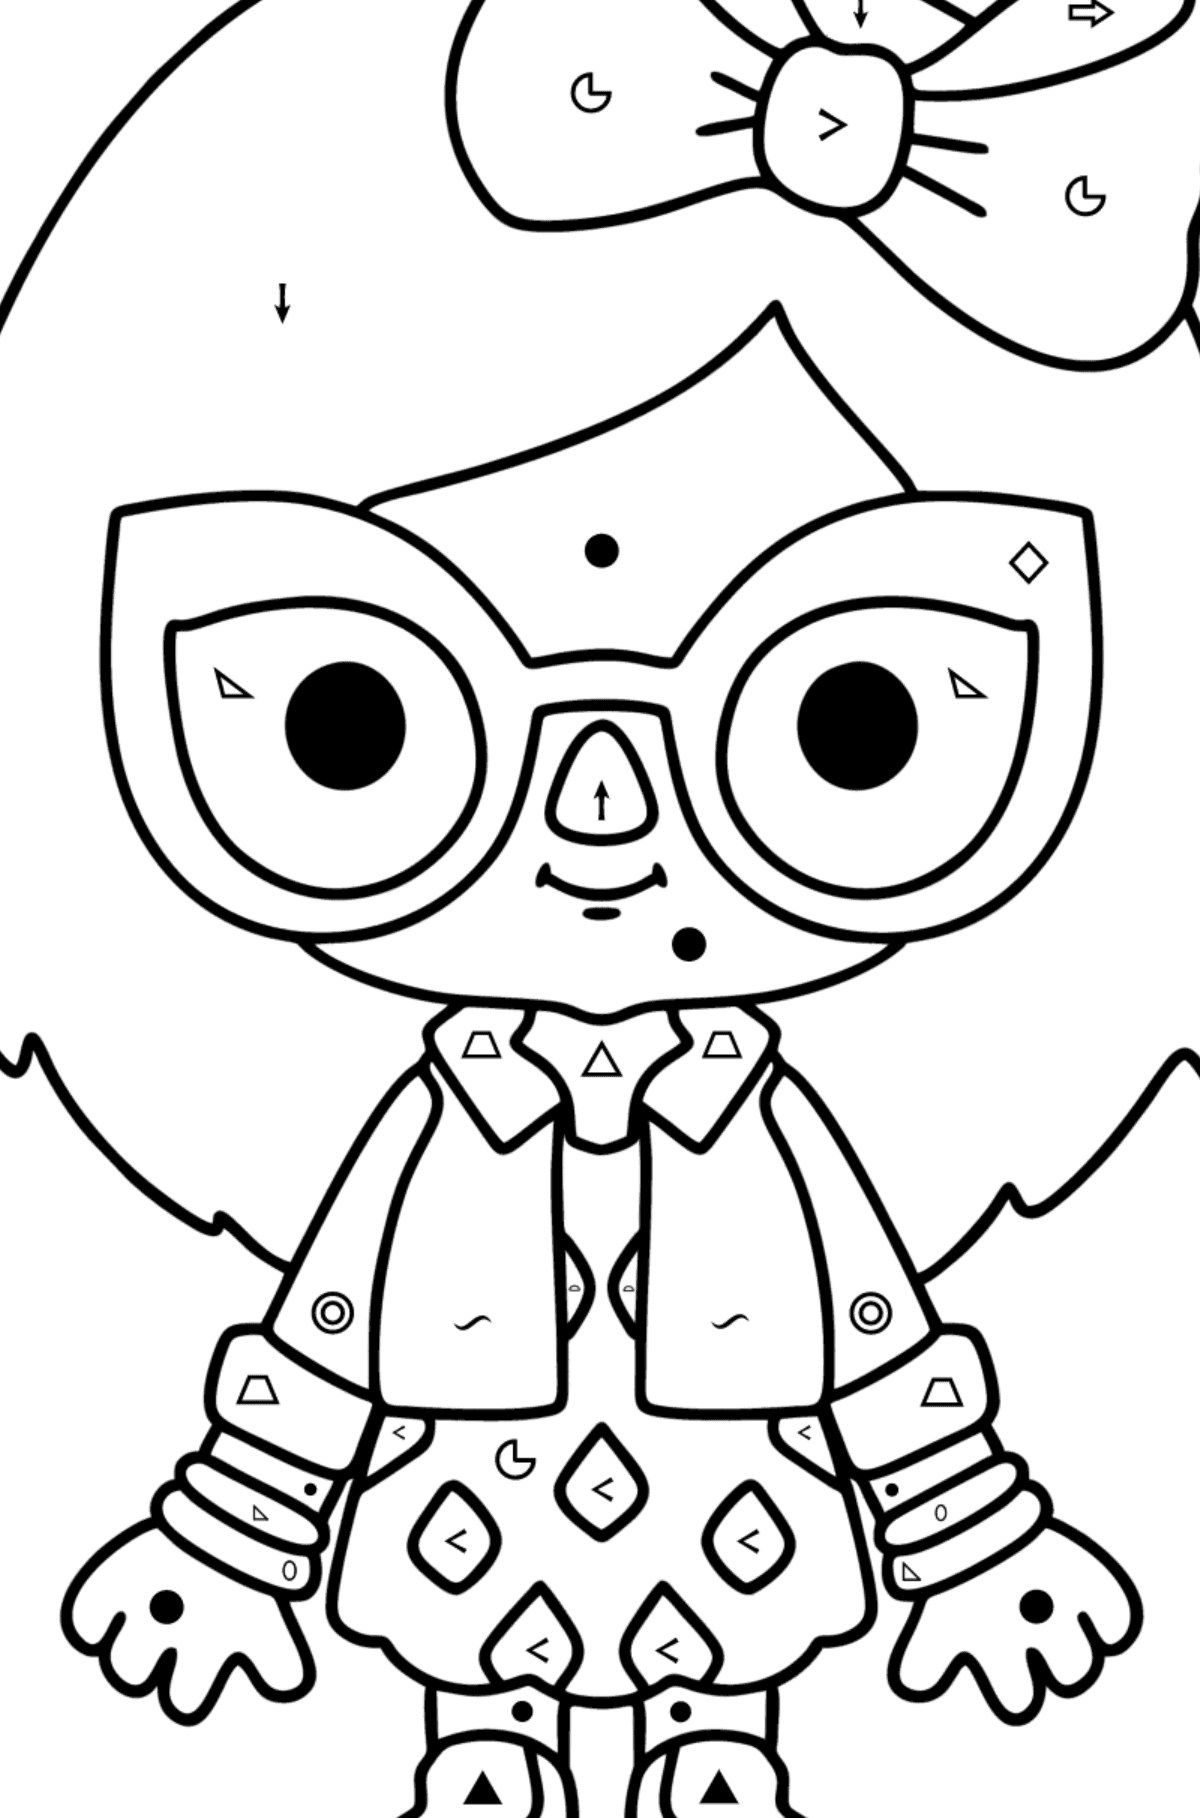 Colouring page Girl tocaboca 01 - Coloring by Symbols and Geometric Shapes for Kids